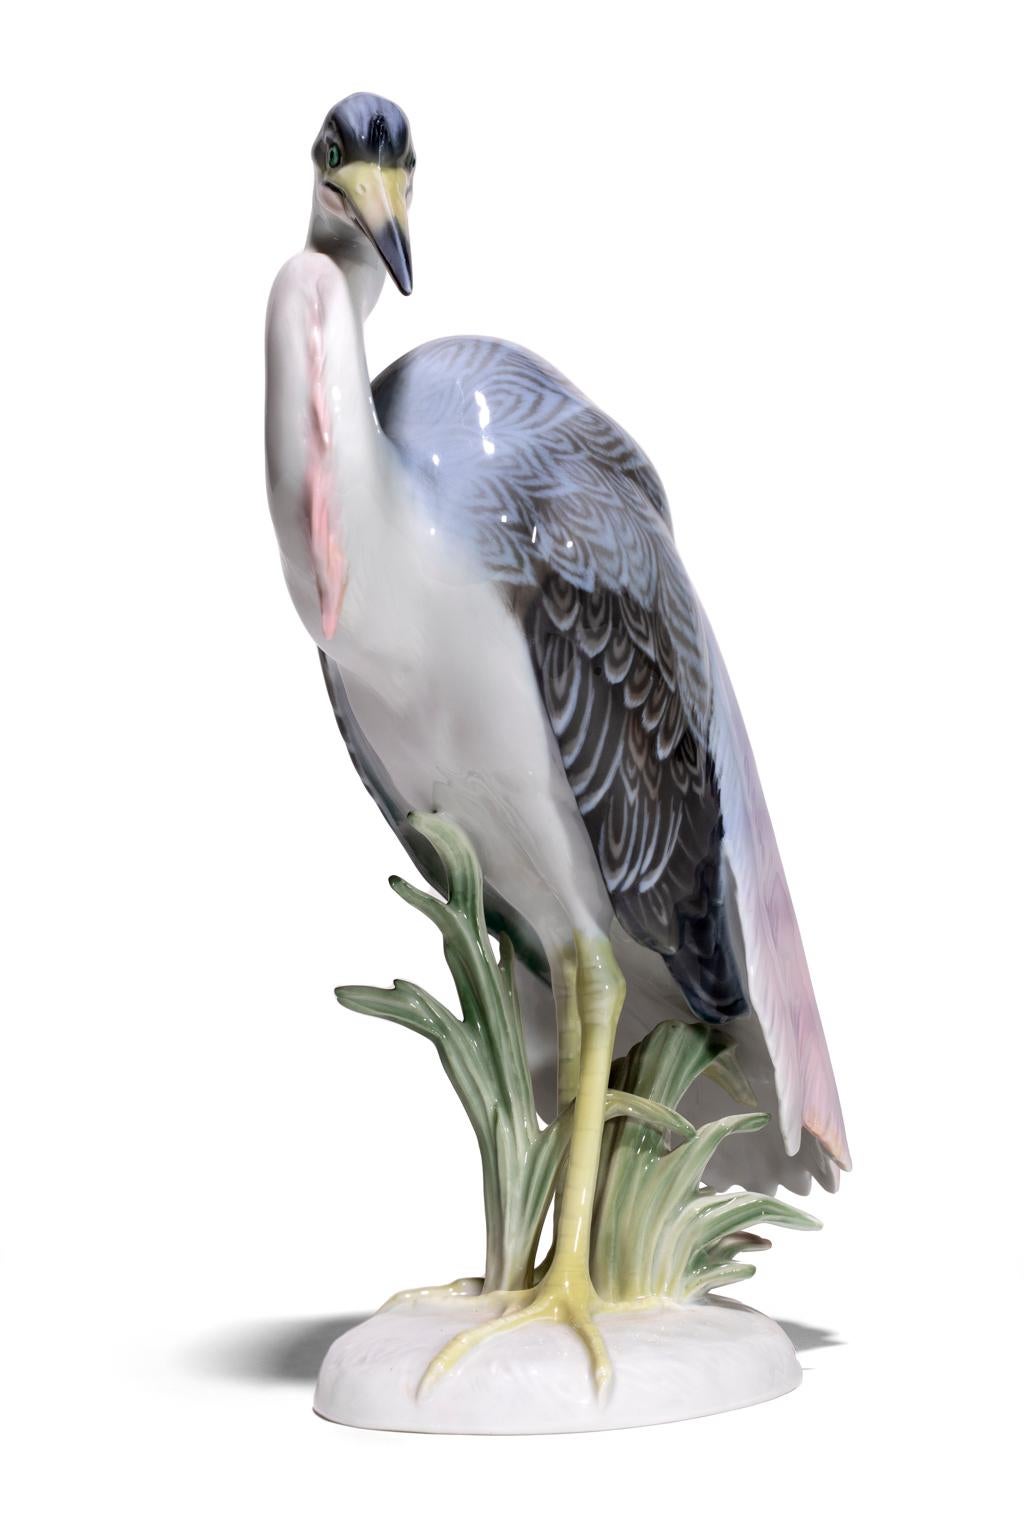 Exquisite vintage Rosenthal Heron Crane porcelain is painstakingly hand-painted in pink, lavenders, gray and green with a delicate touch. Its pose is one of dignity and authority and appears to be pausing as it picks its way through the watery